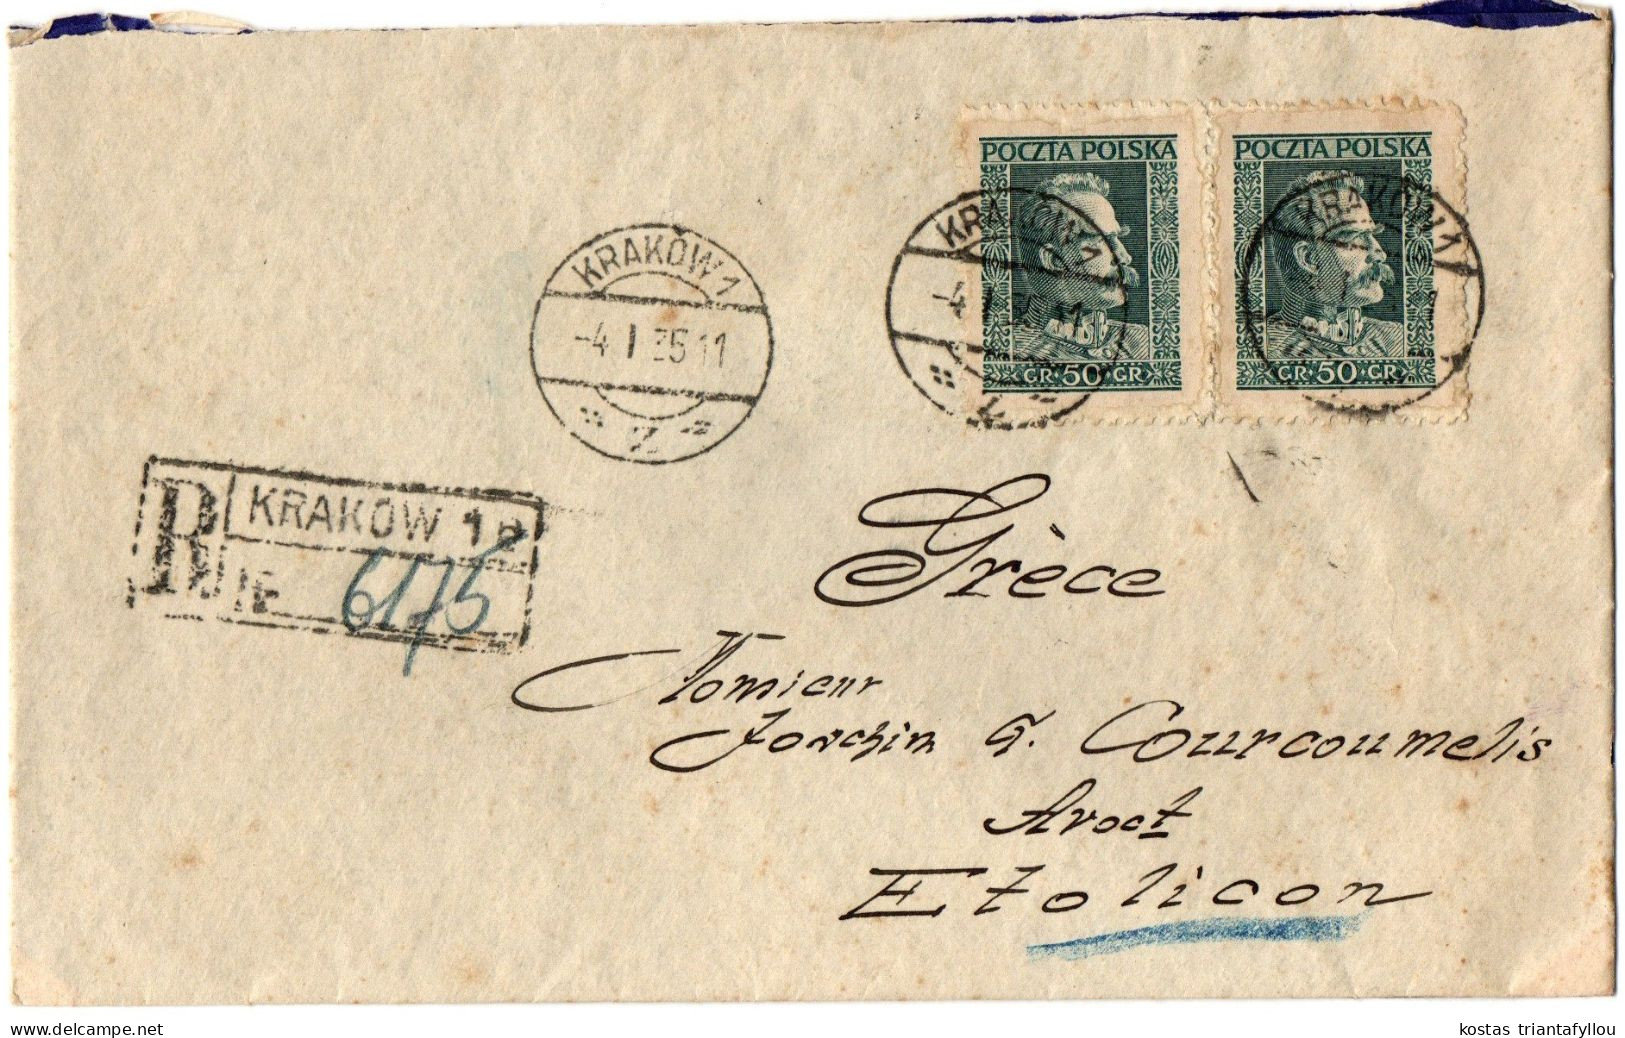 1, 3 POLAND, 1935, COVER TO GREECE - Covers & Documents